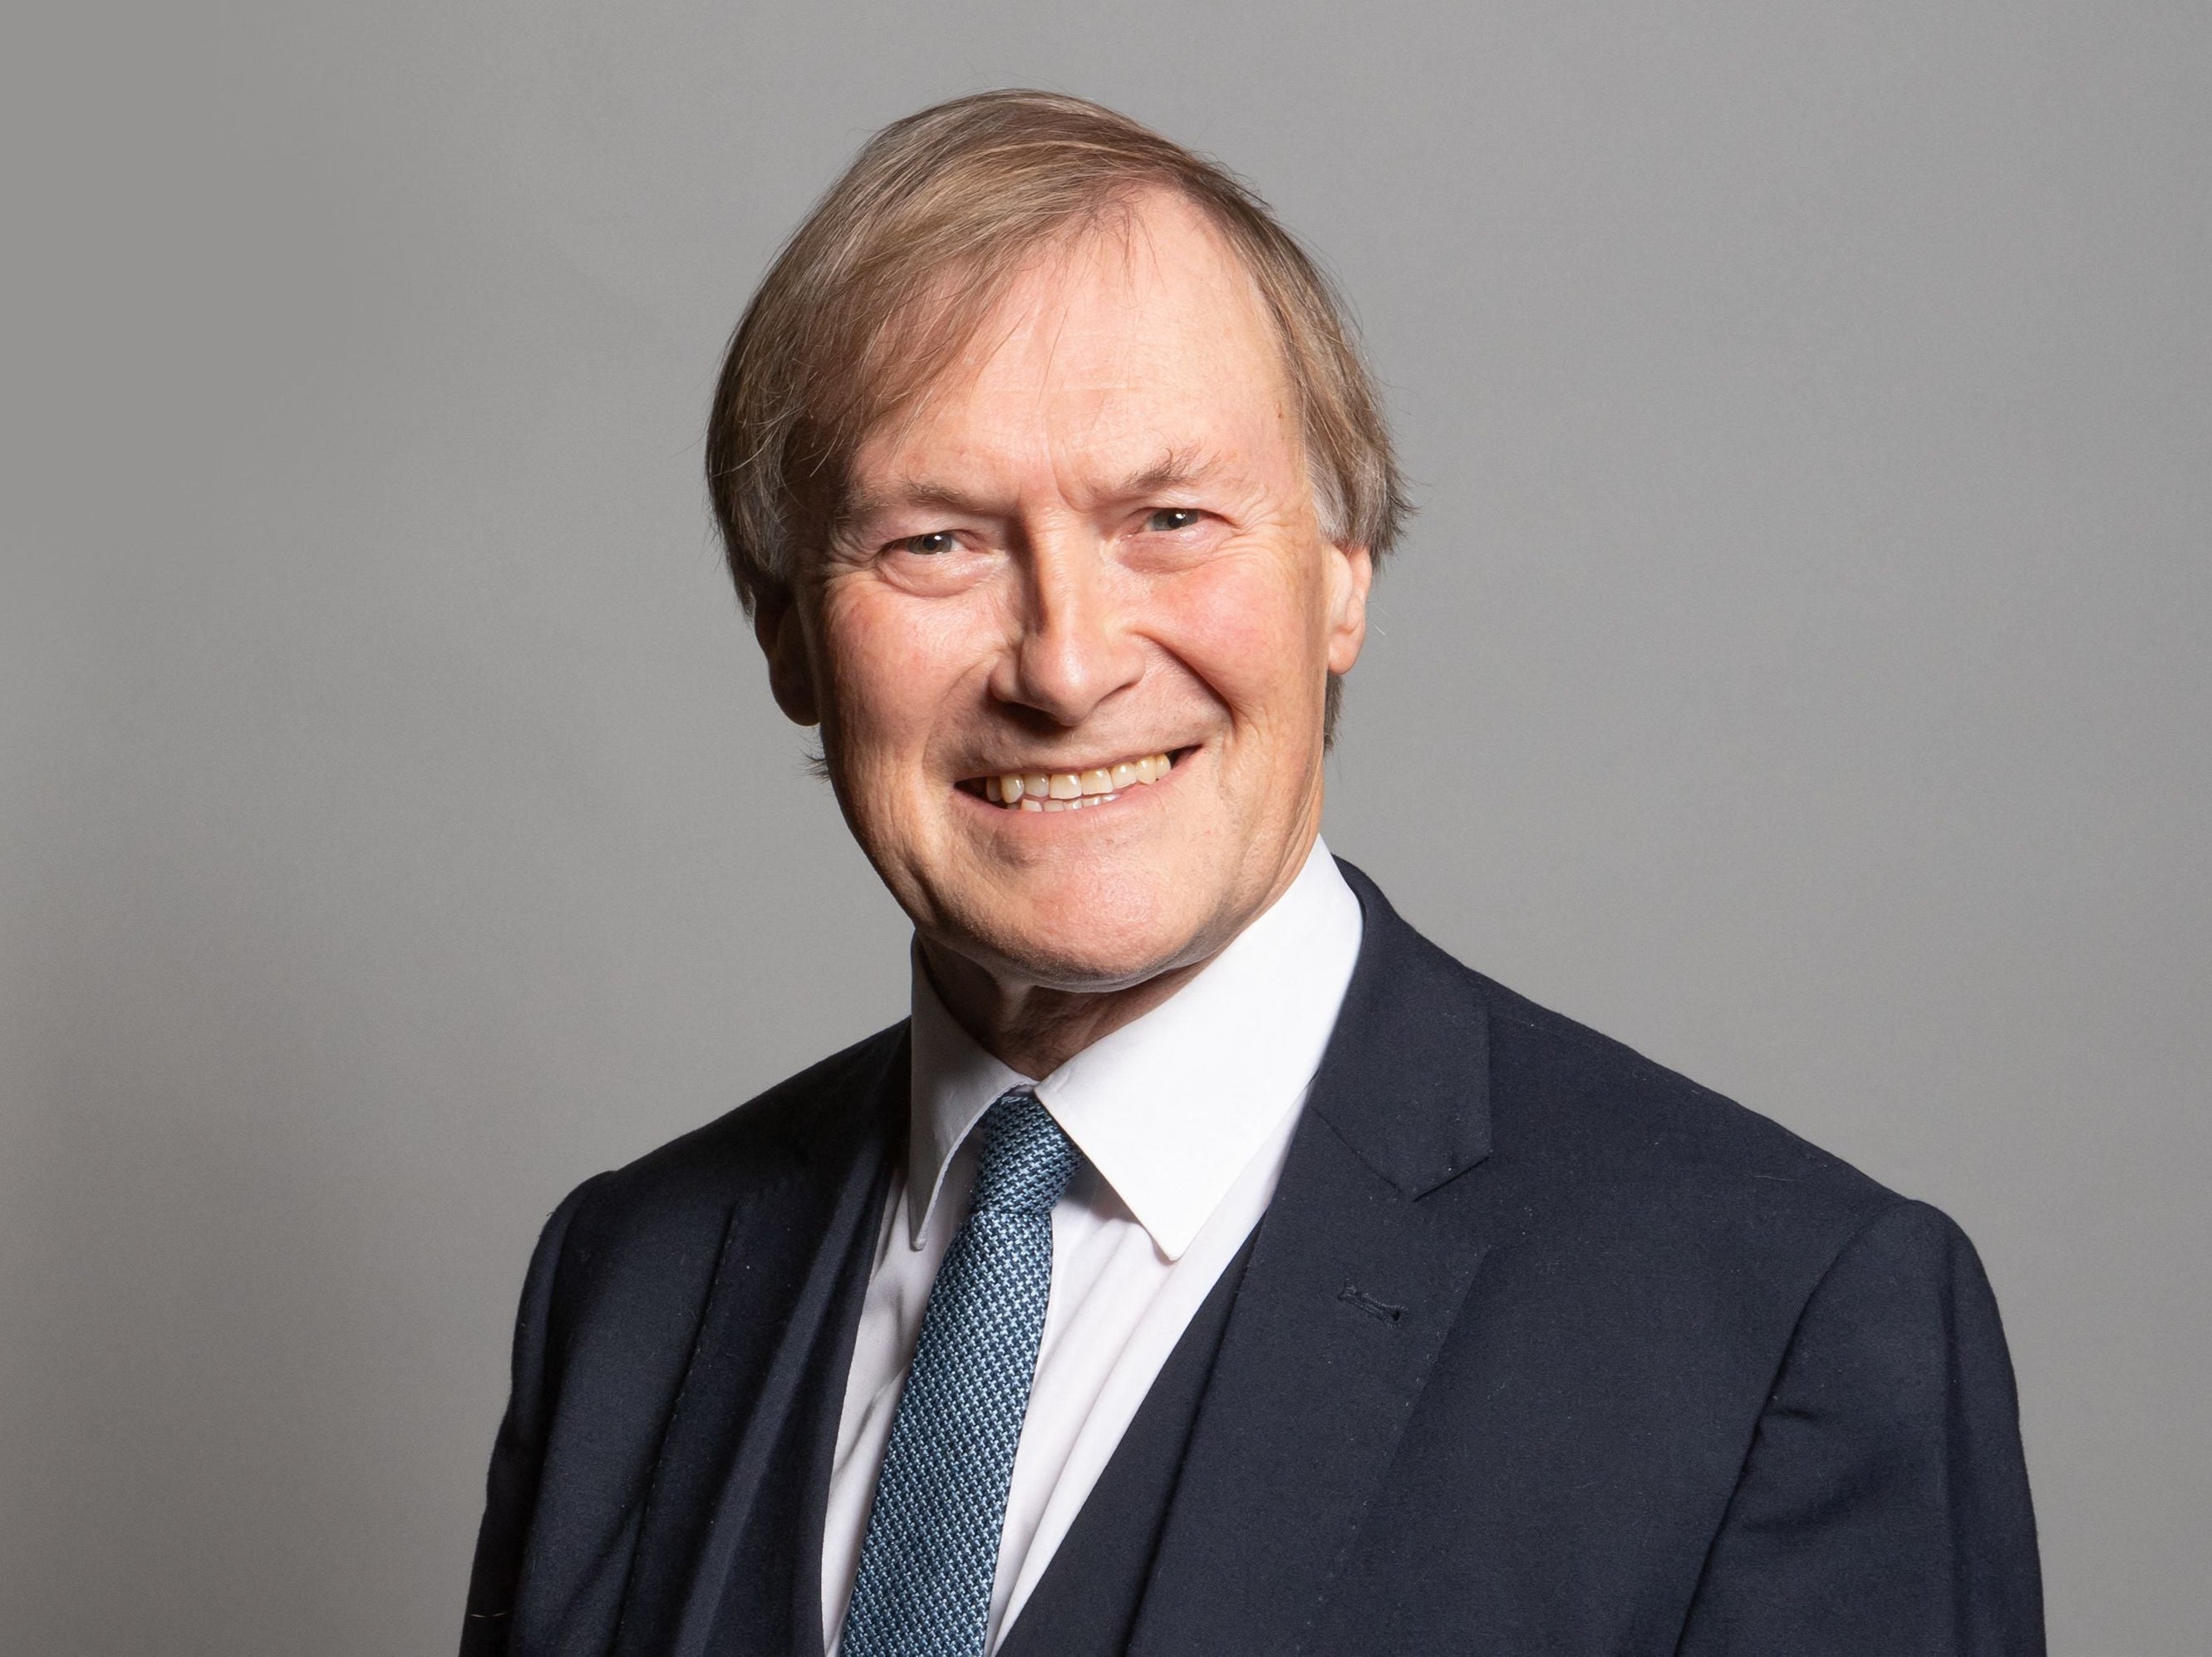 Sir David Amess, who had served in parliament since 1983